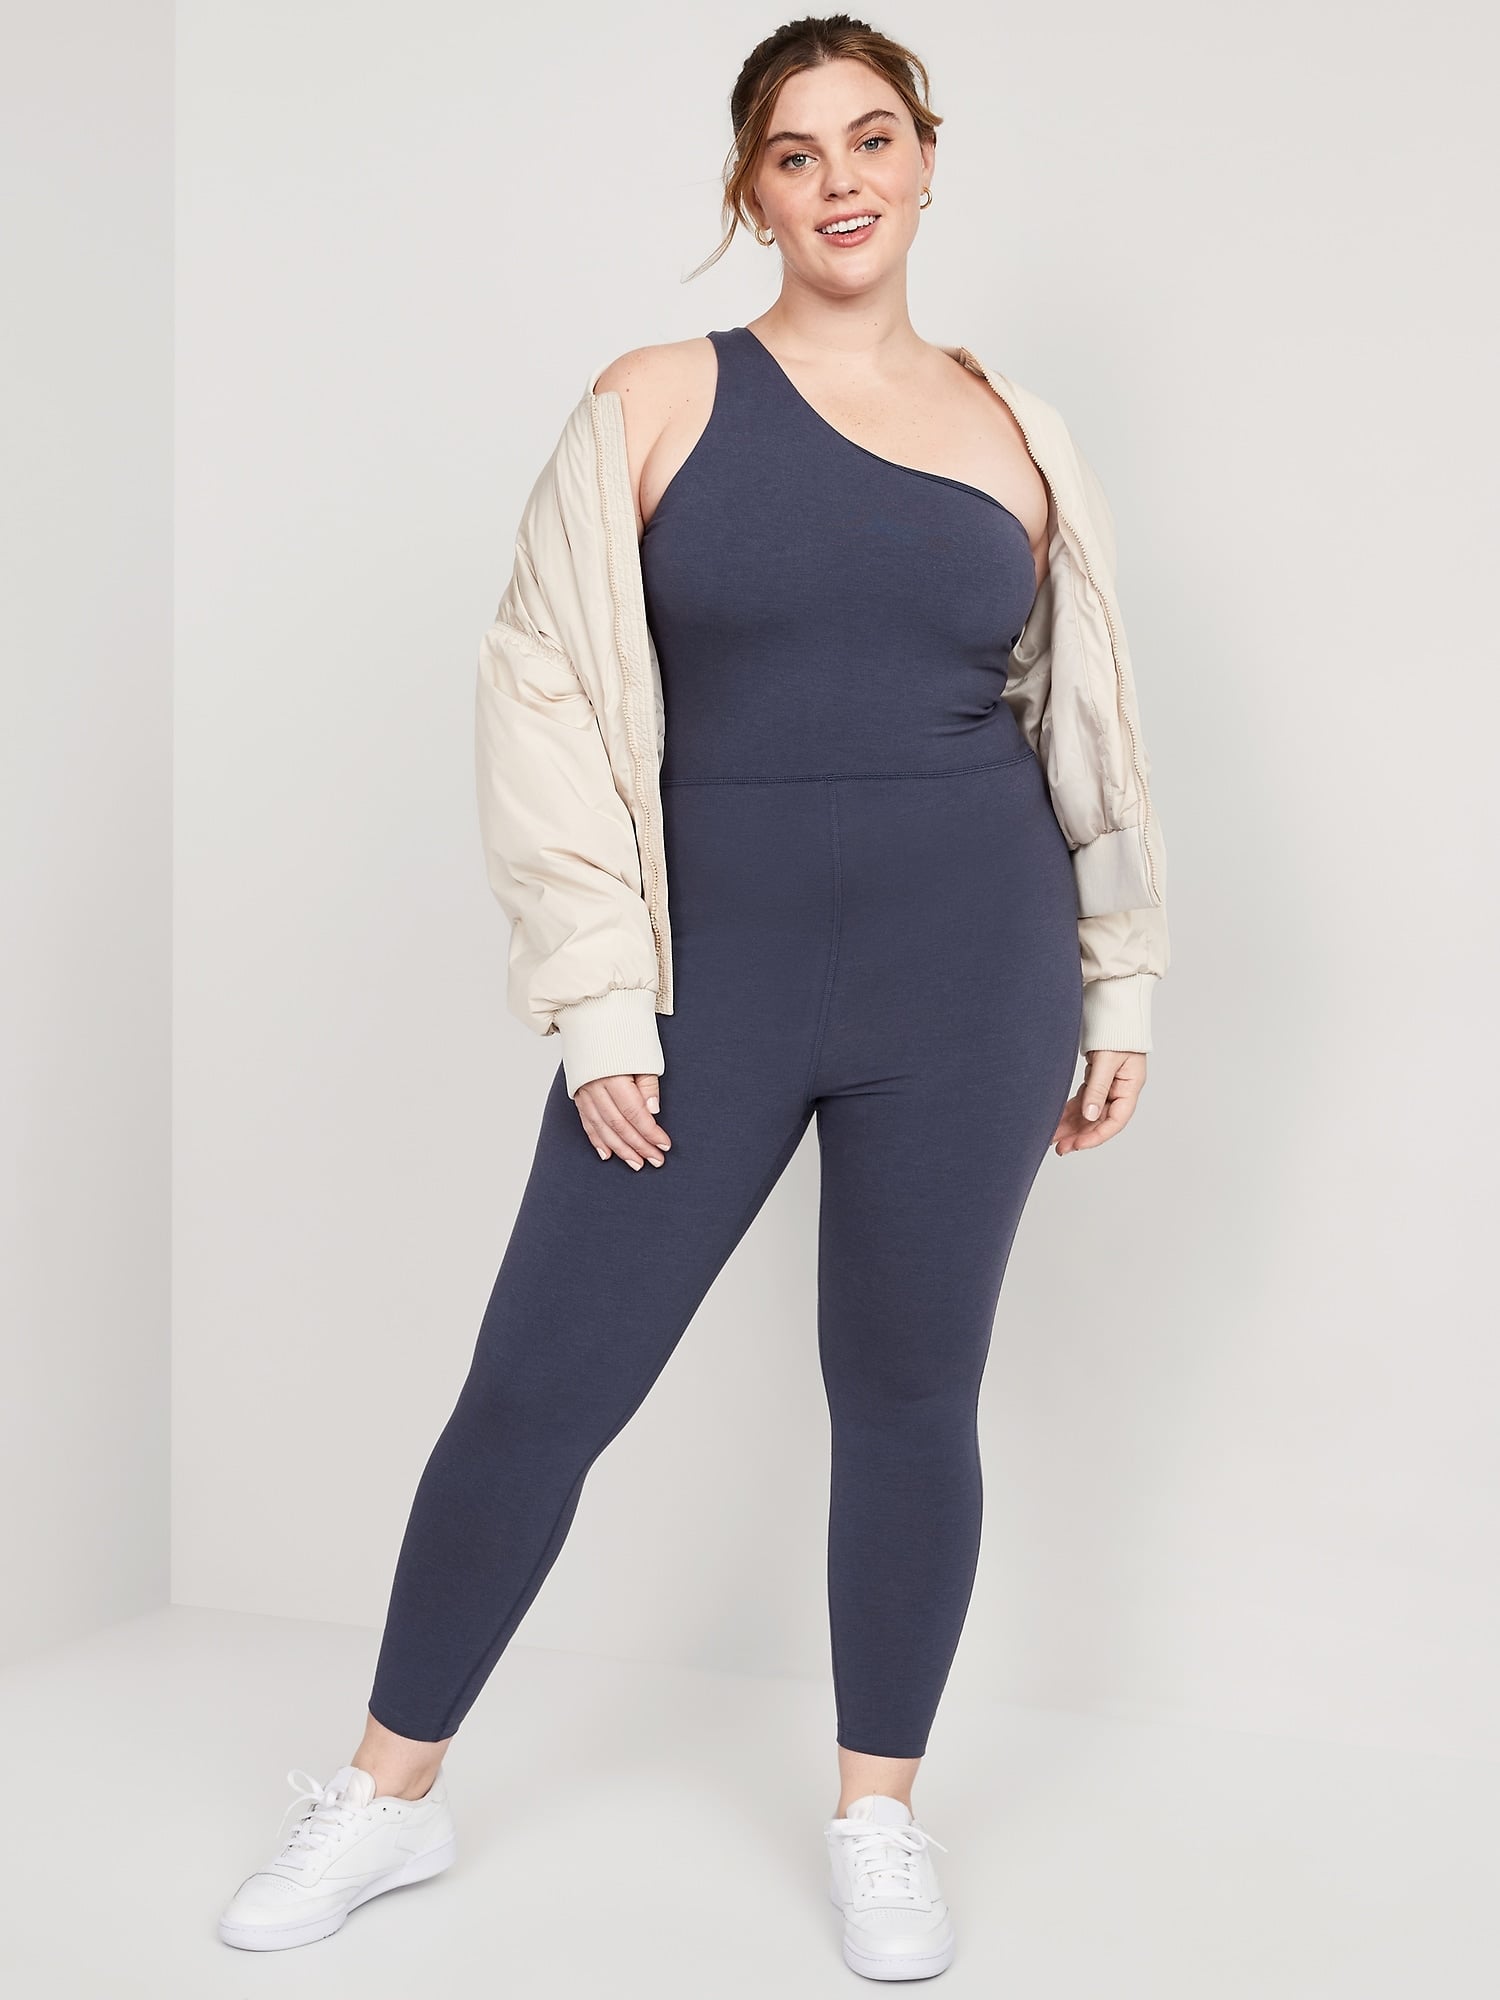 Old Navy Plus Size Clothing Review - The Plus Life